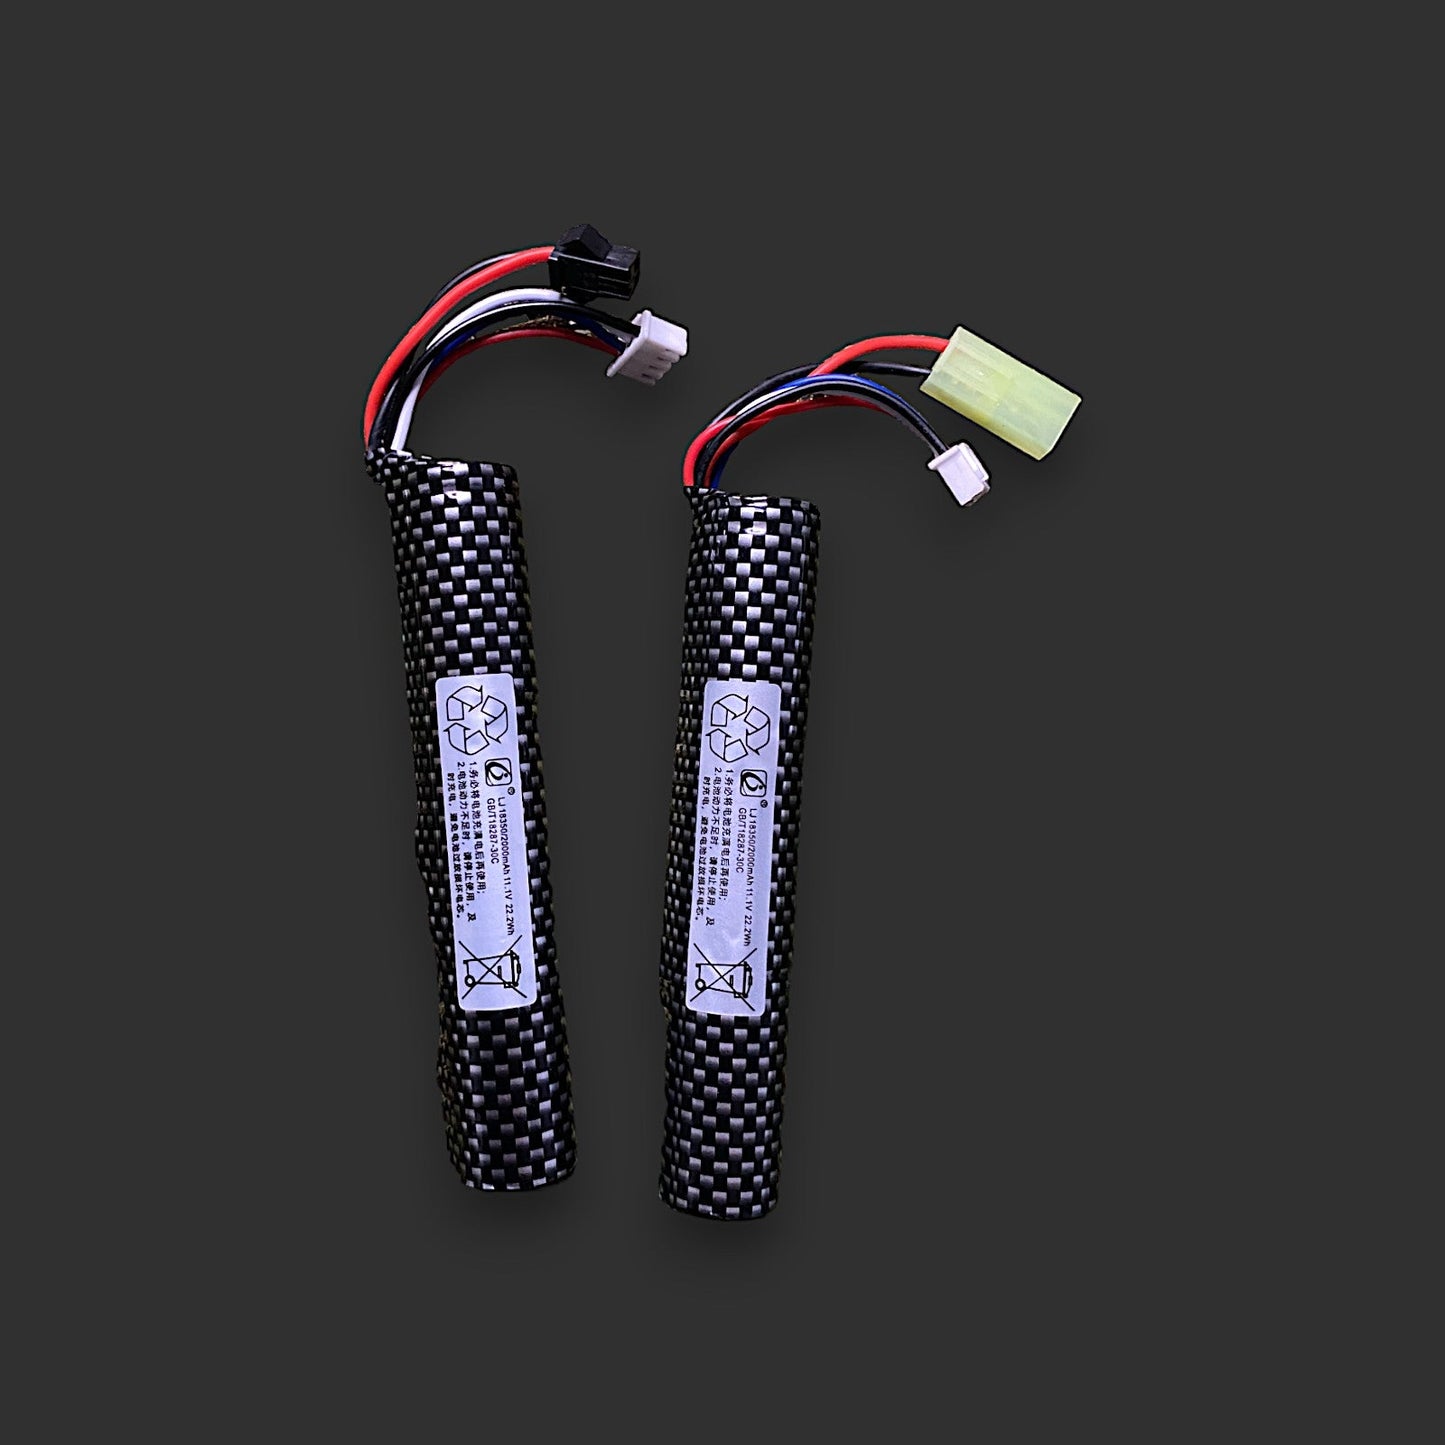 Two BlasterMaster cylindrical 11.1V 2000mAh lithium-ion batteries with carbon fiber patterns and connected wires, isolated on a gray background.